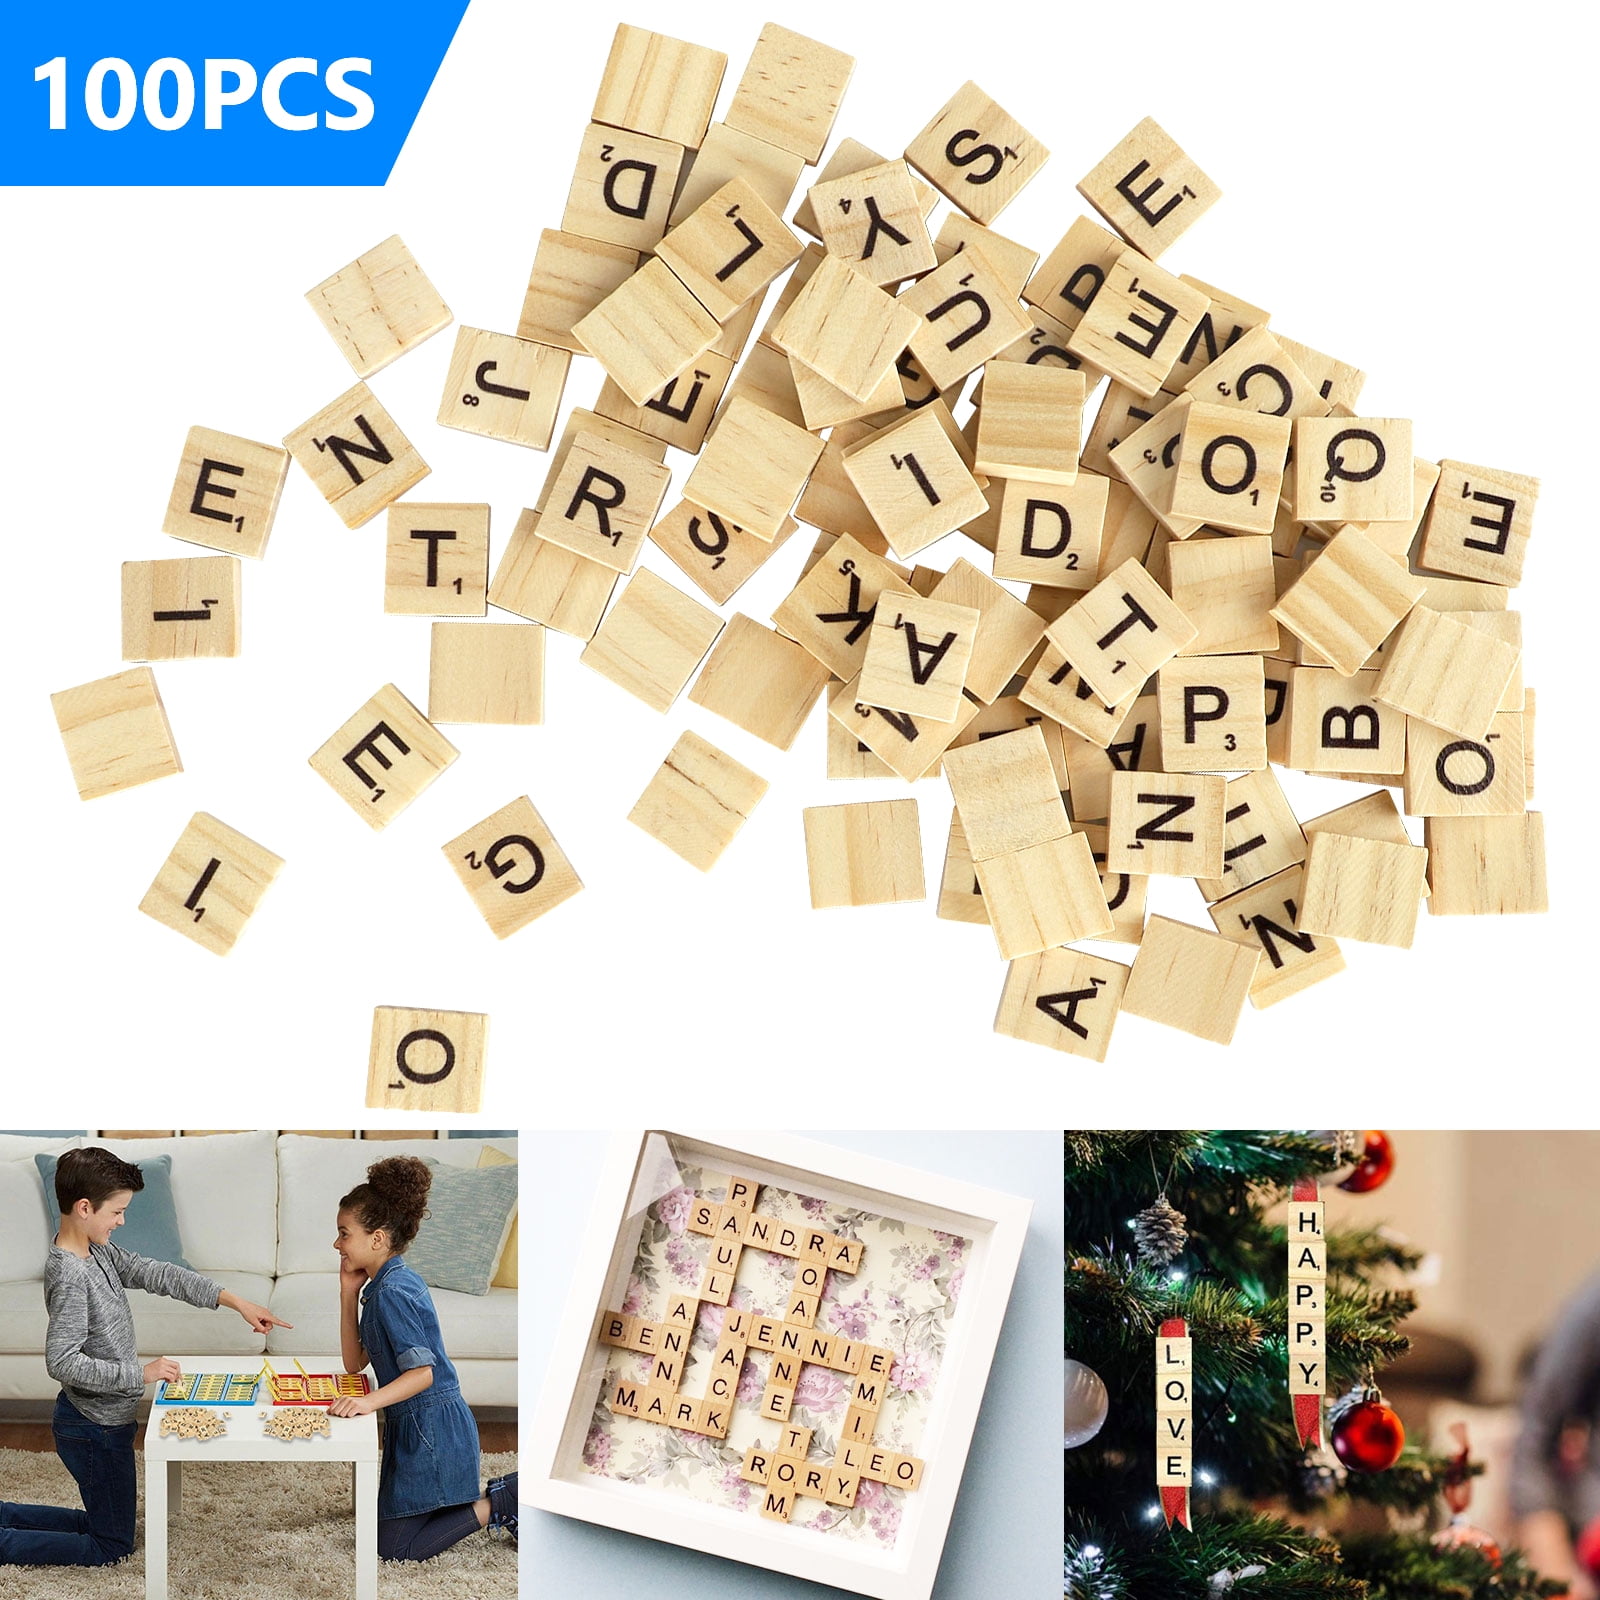 UpWords Board Game Replacement Parts Pieces 100 Plastic Letter Tiles Rack Holder 